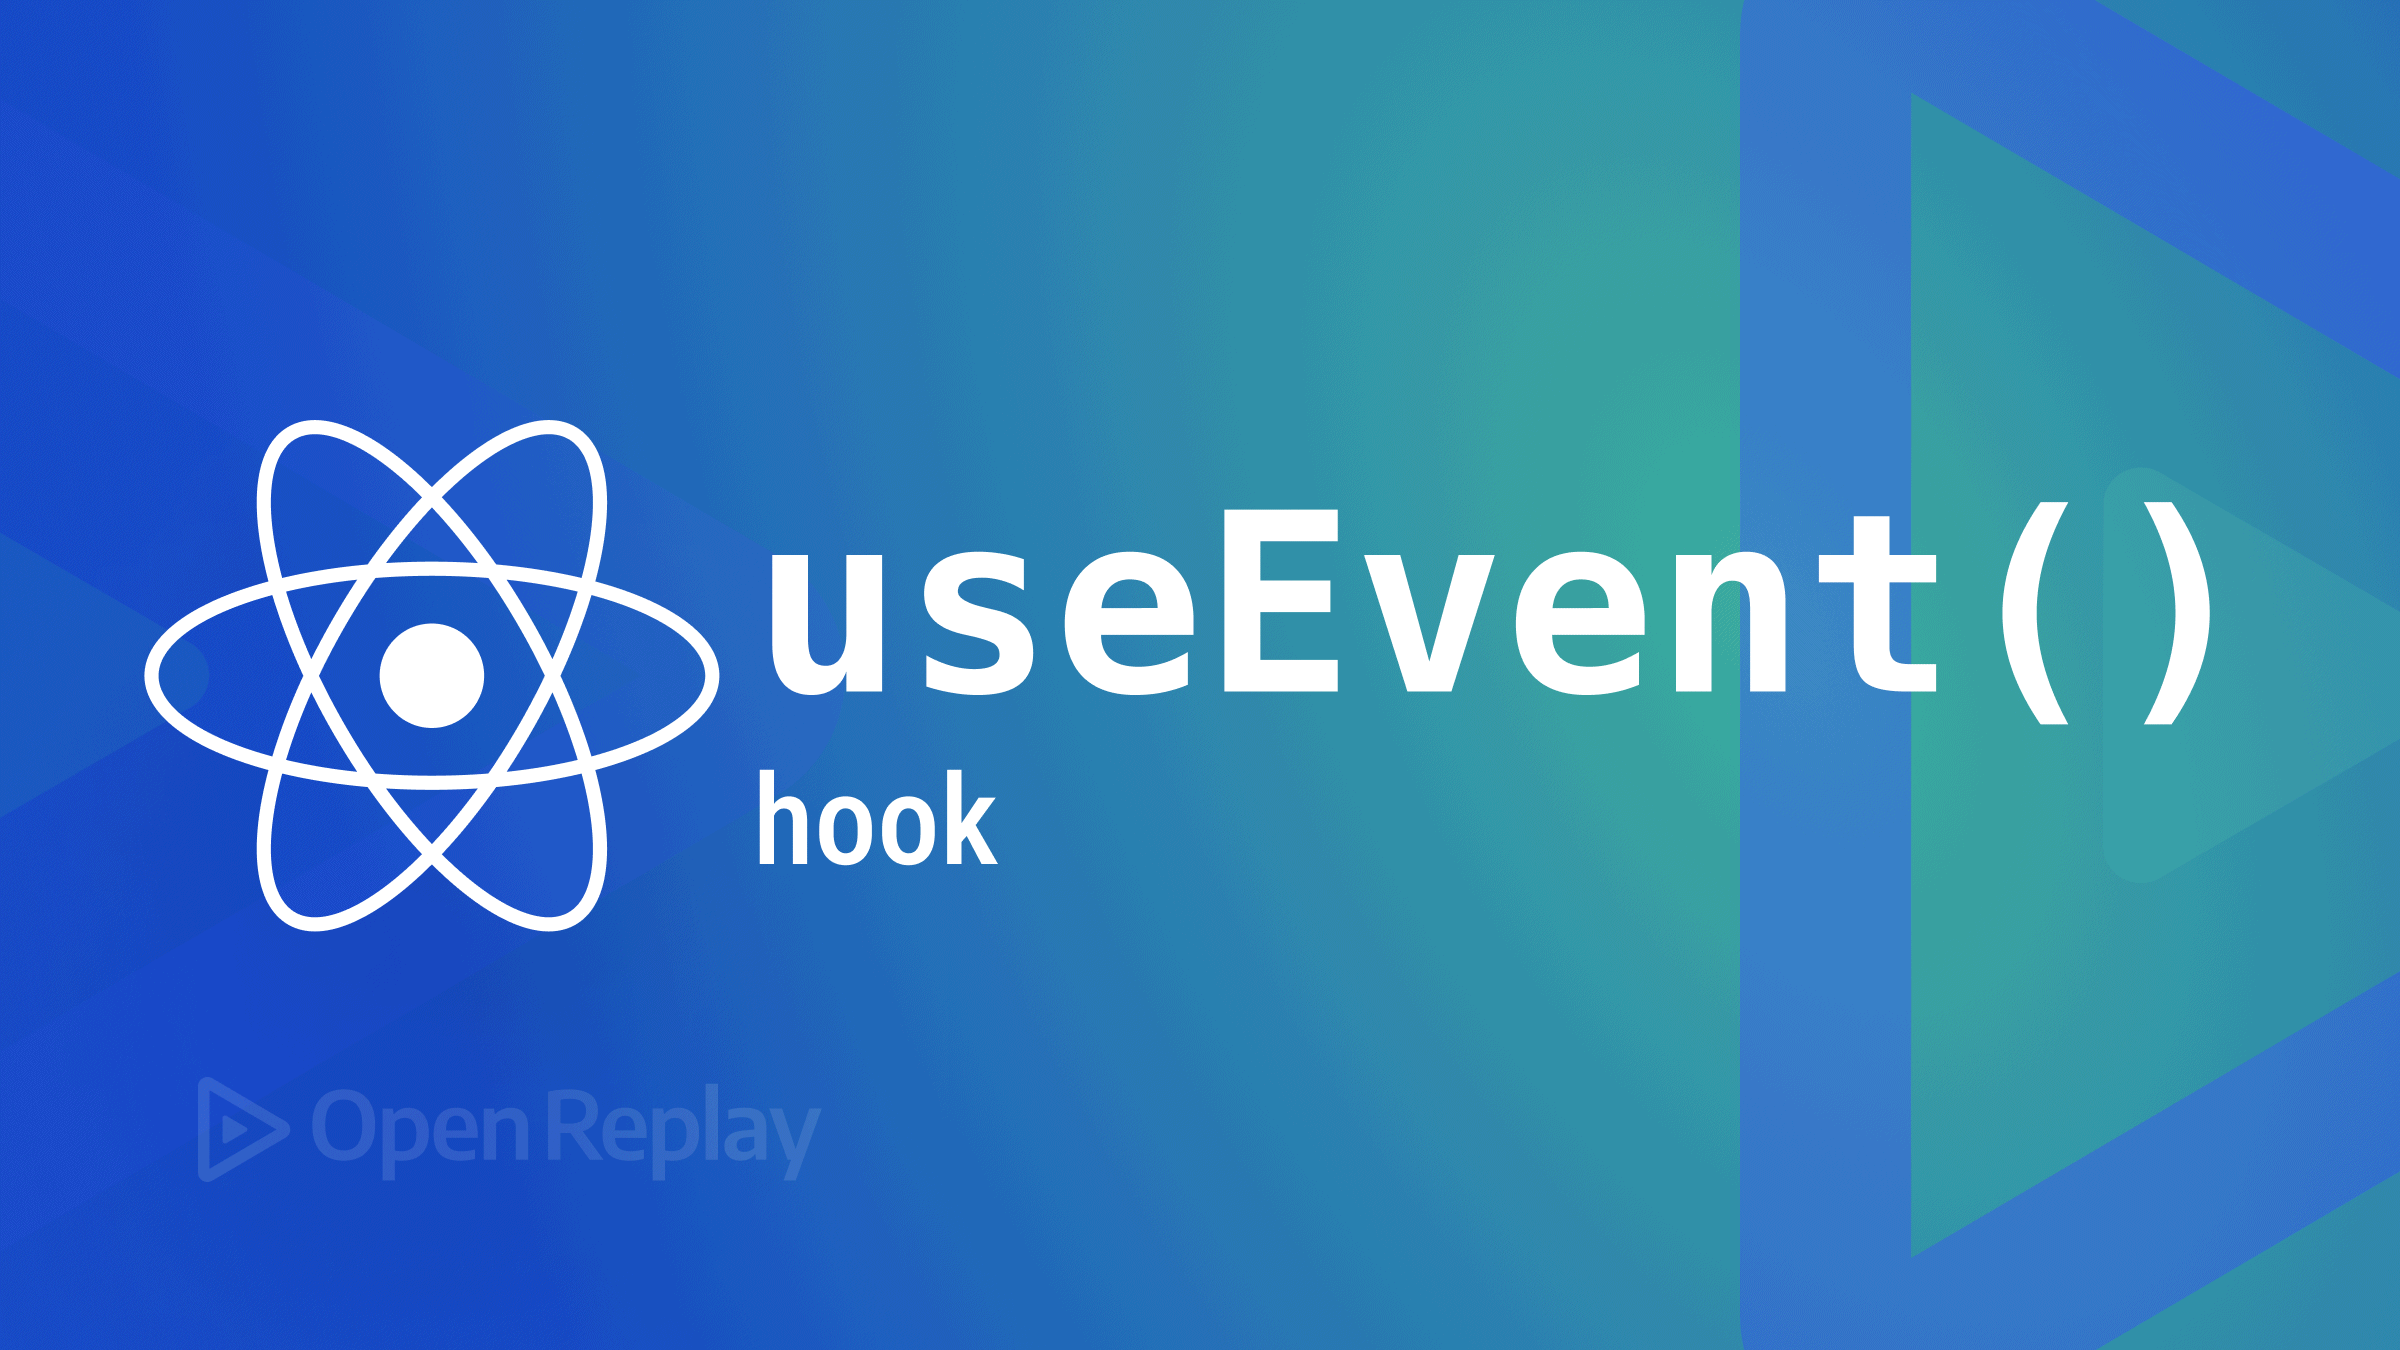 Introduction to the upcoming useEvent hook RFC